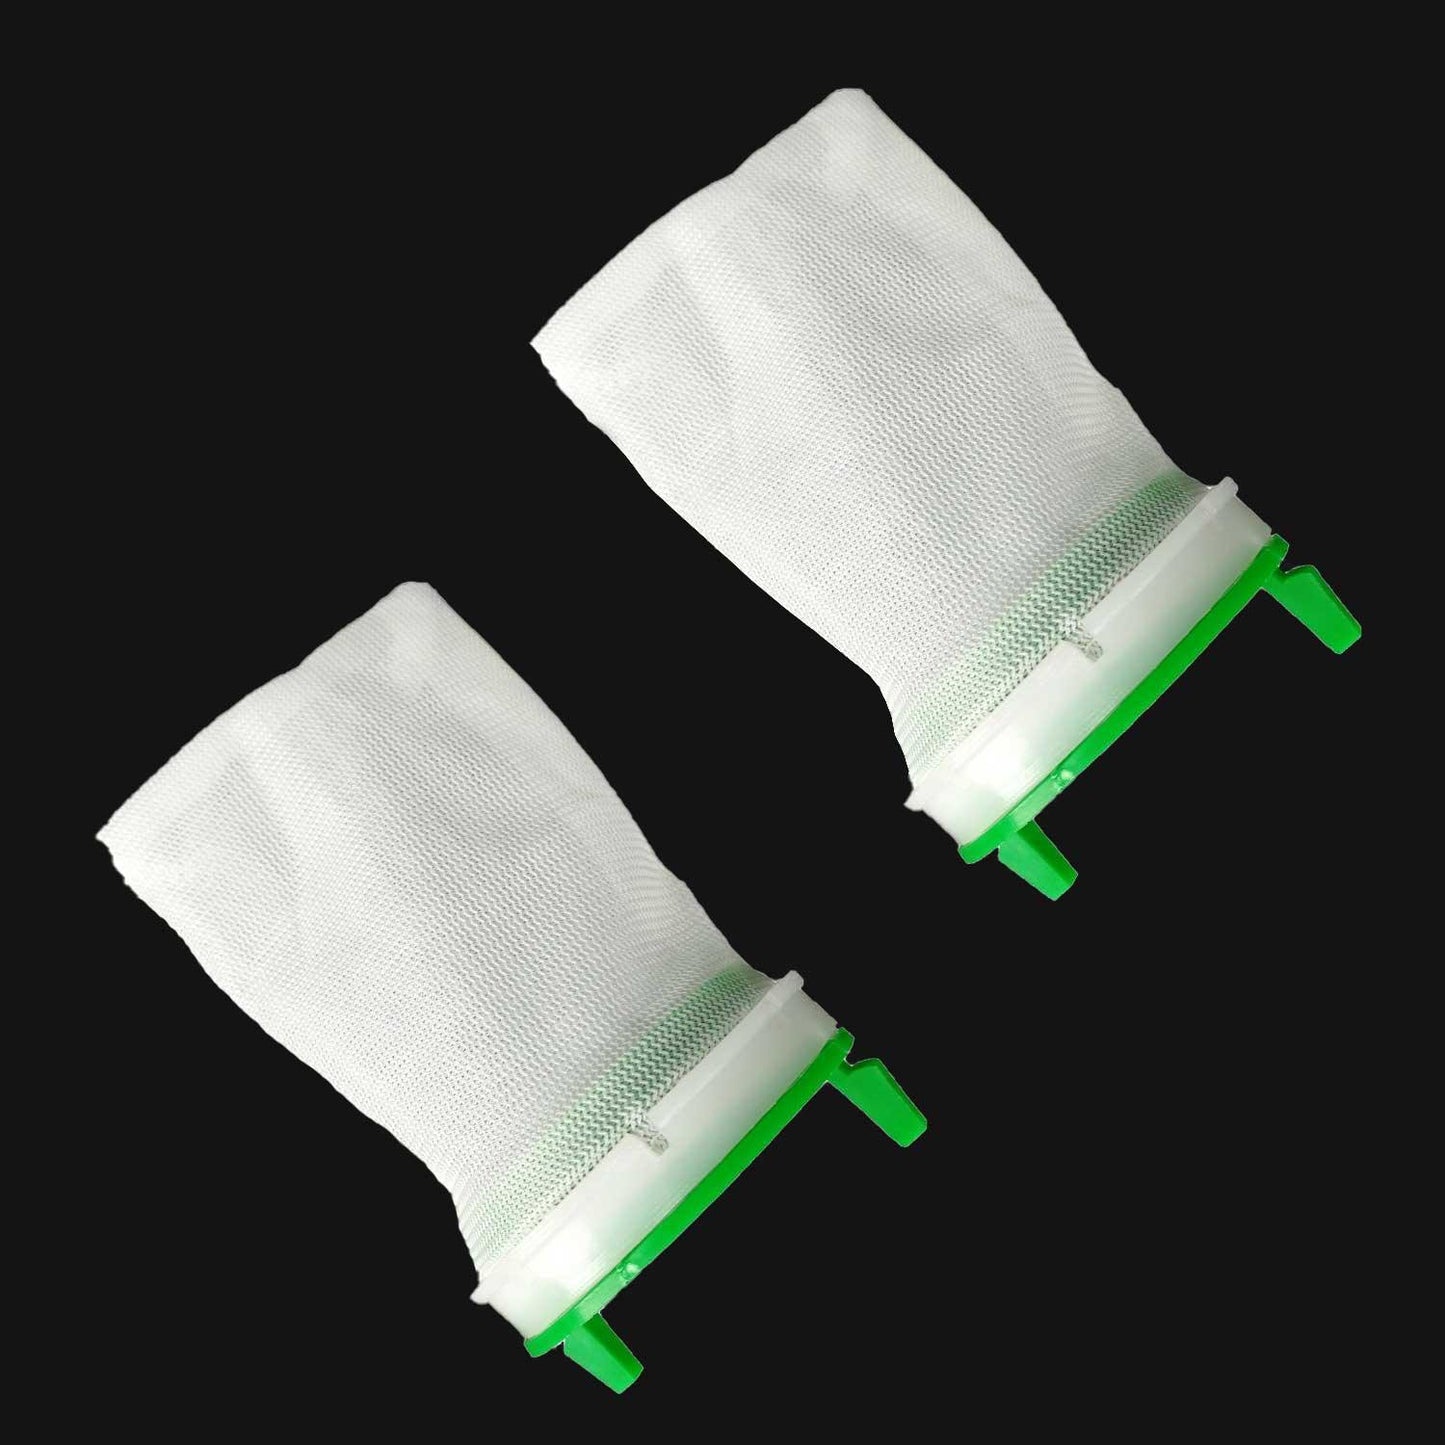 2X Washing Machine Lint Filter Bag For Simpson SWT605 SWT951 36D528SA*03 36S502E Sparesbarn